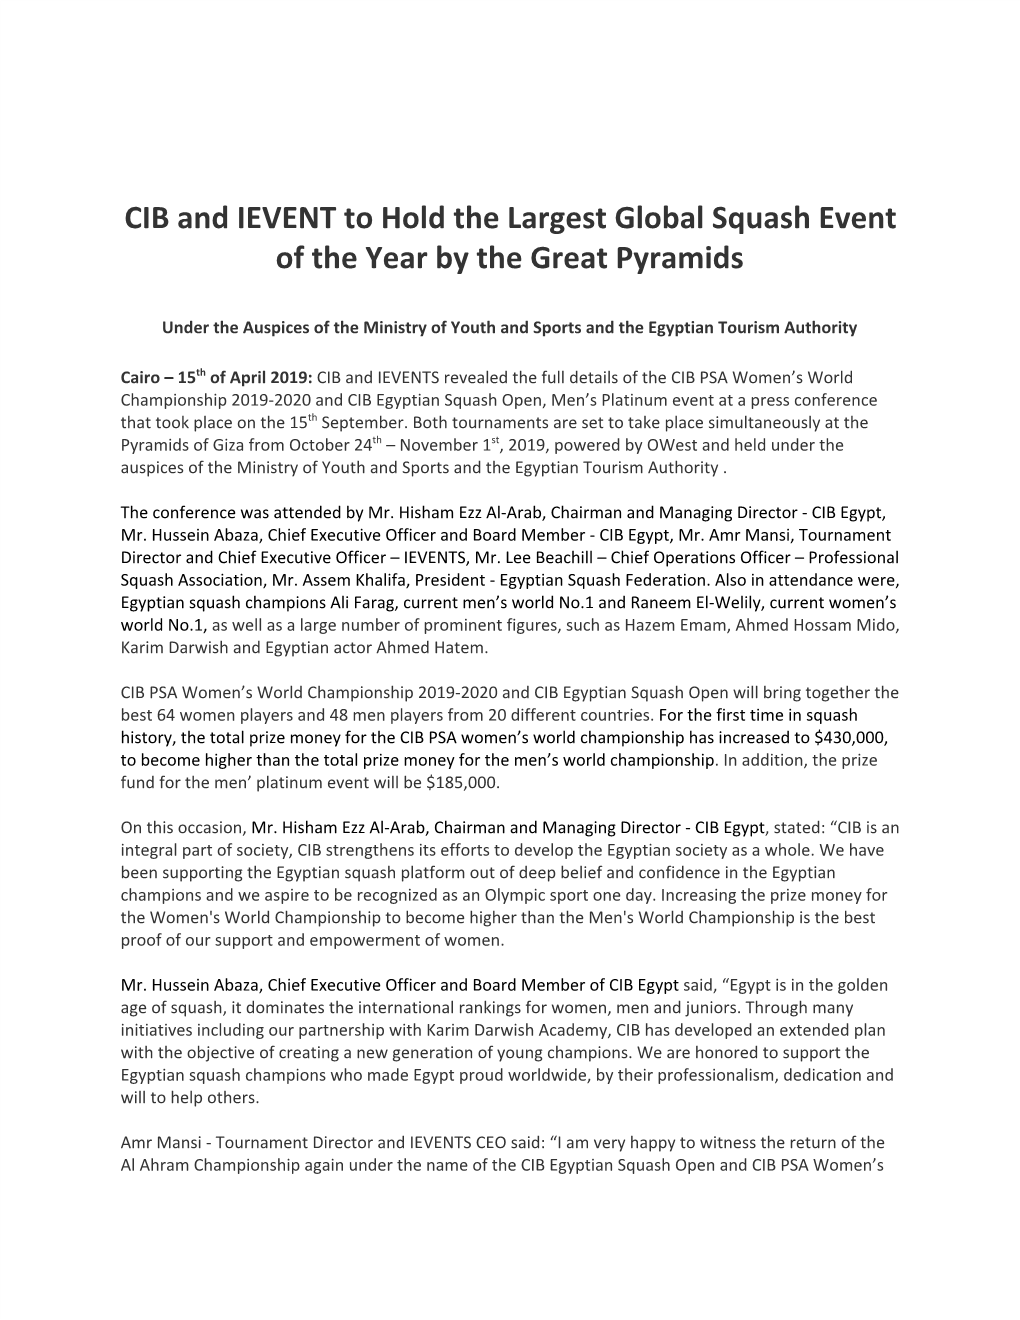 CIB and IEVENT to Hold the Largest Global Squash Event of the Year by the Great Pyramids